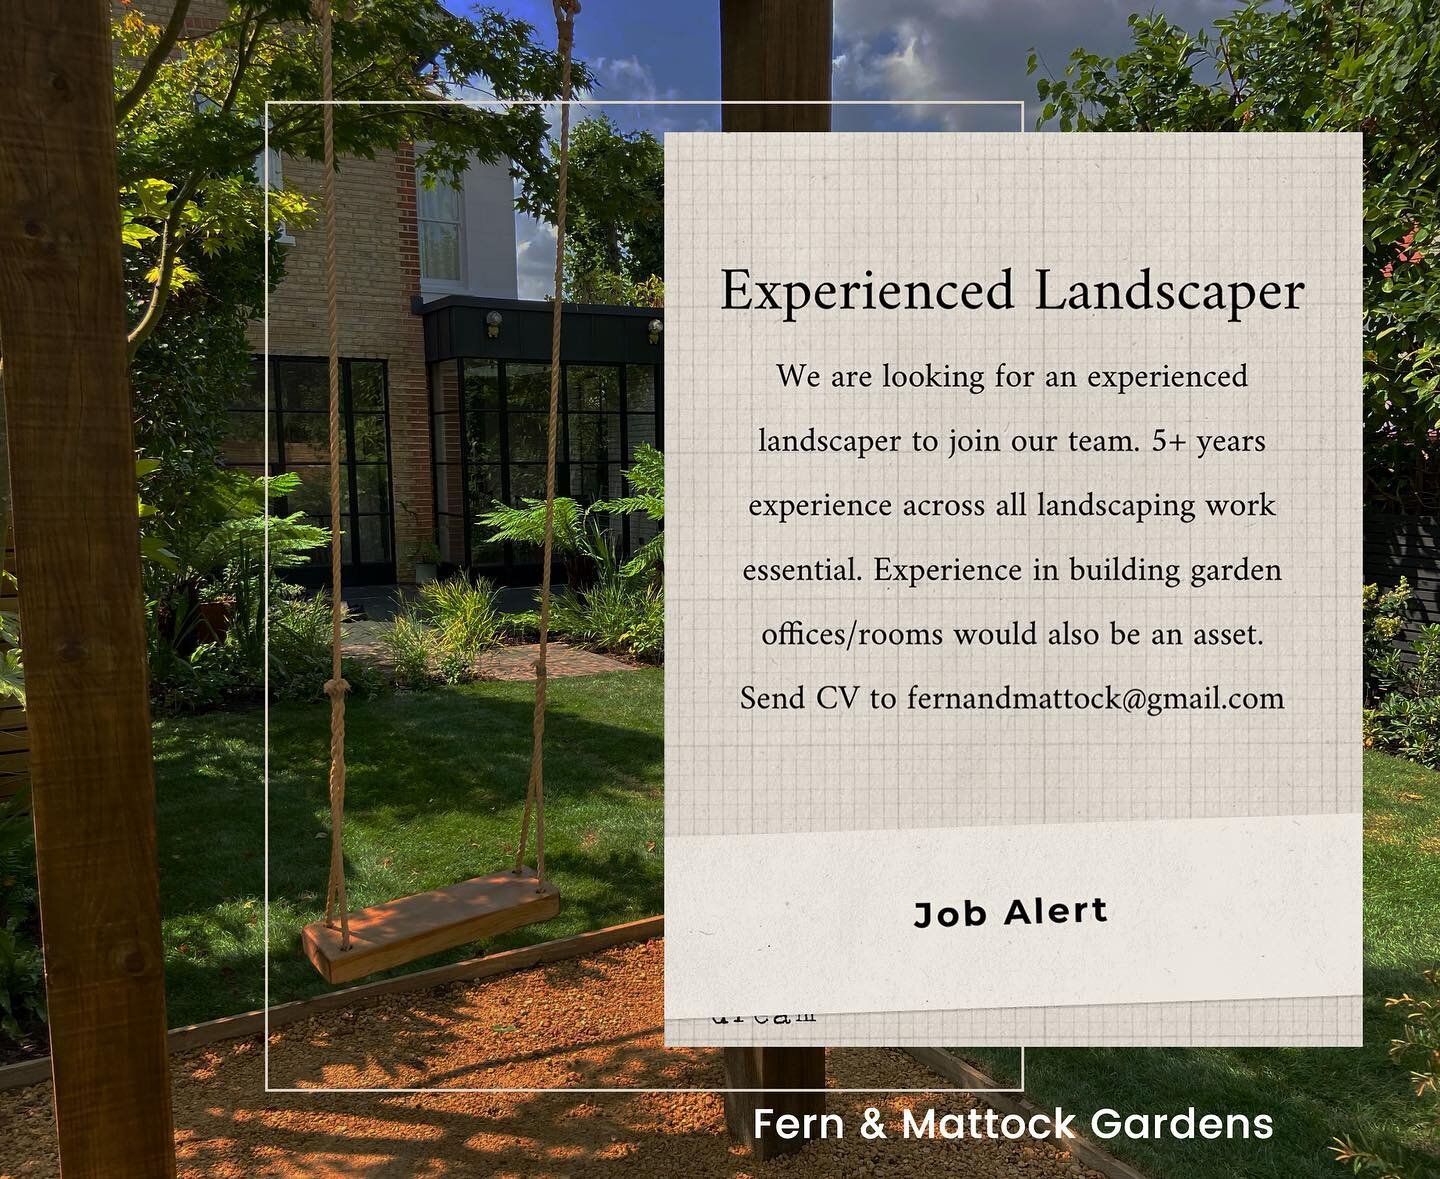 We are looking for a head landscaper. Very generous salary and holiday. Get in touch and send CV to fernandmattock@gmail.com